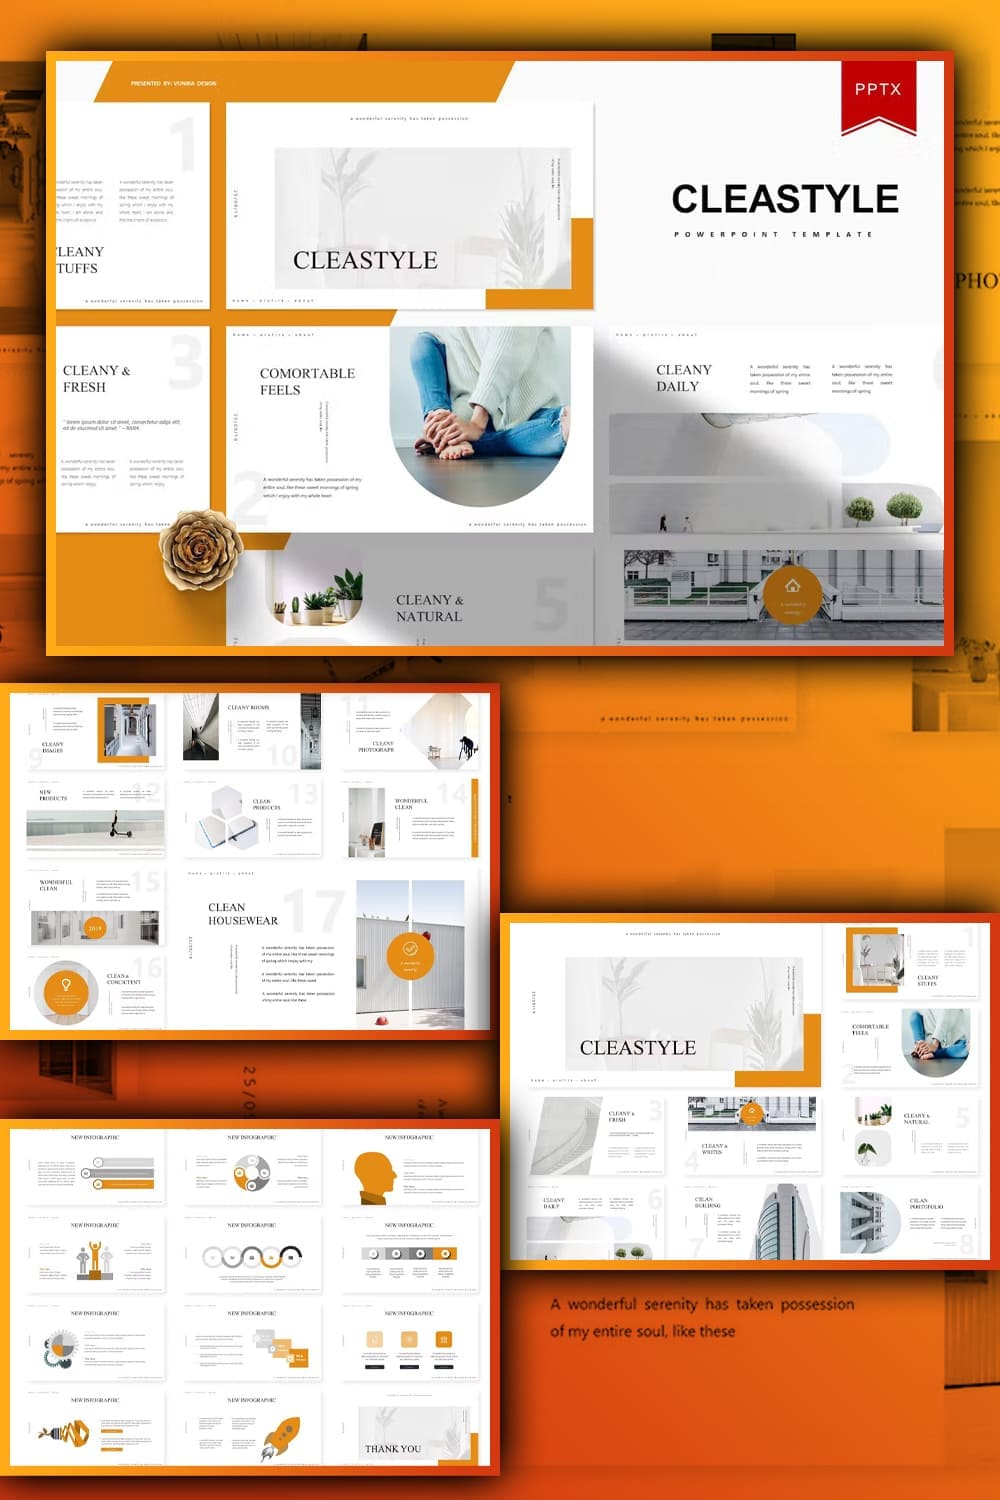 Inscription “A wonderful serenity has taken possession of my entire soul, like these” of Cleastyle Powerpoint template.